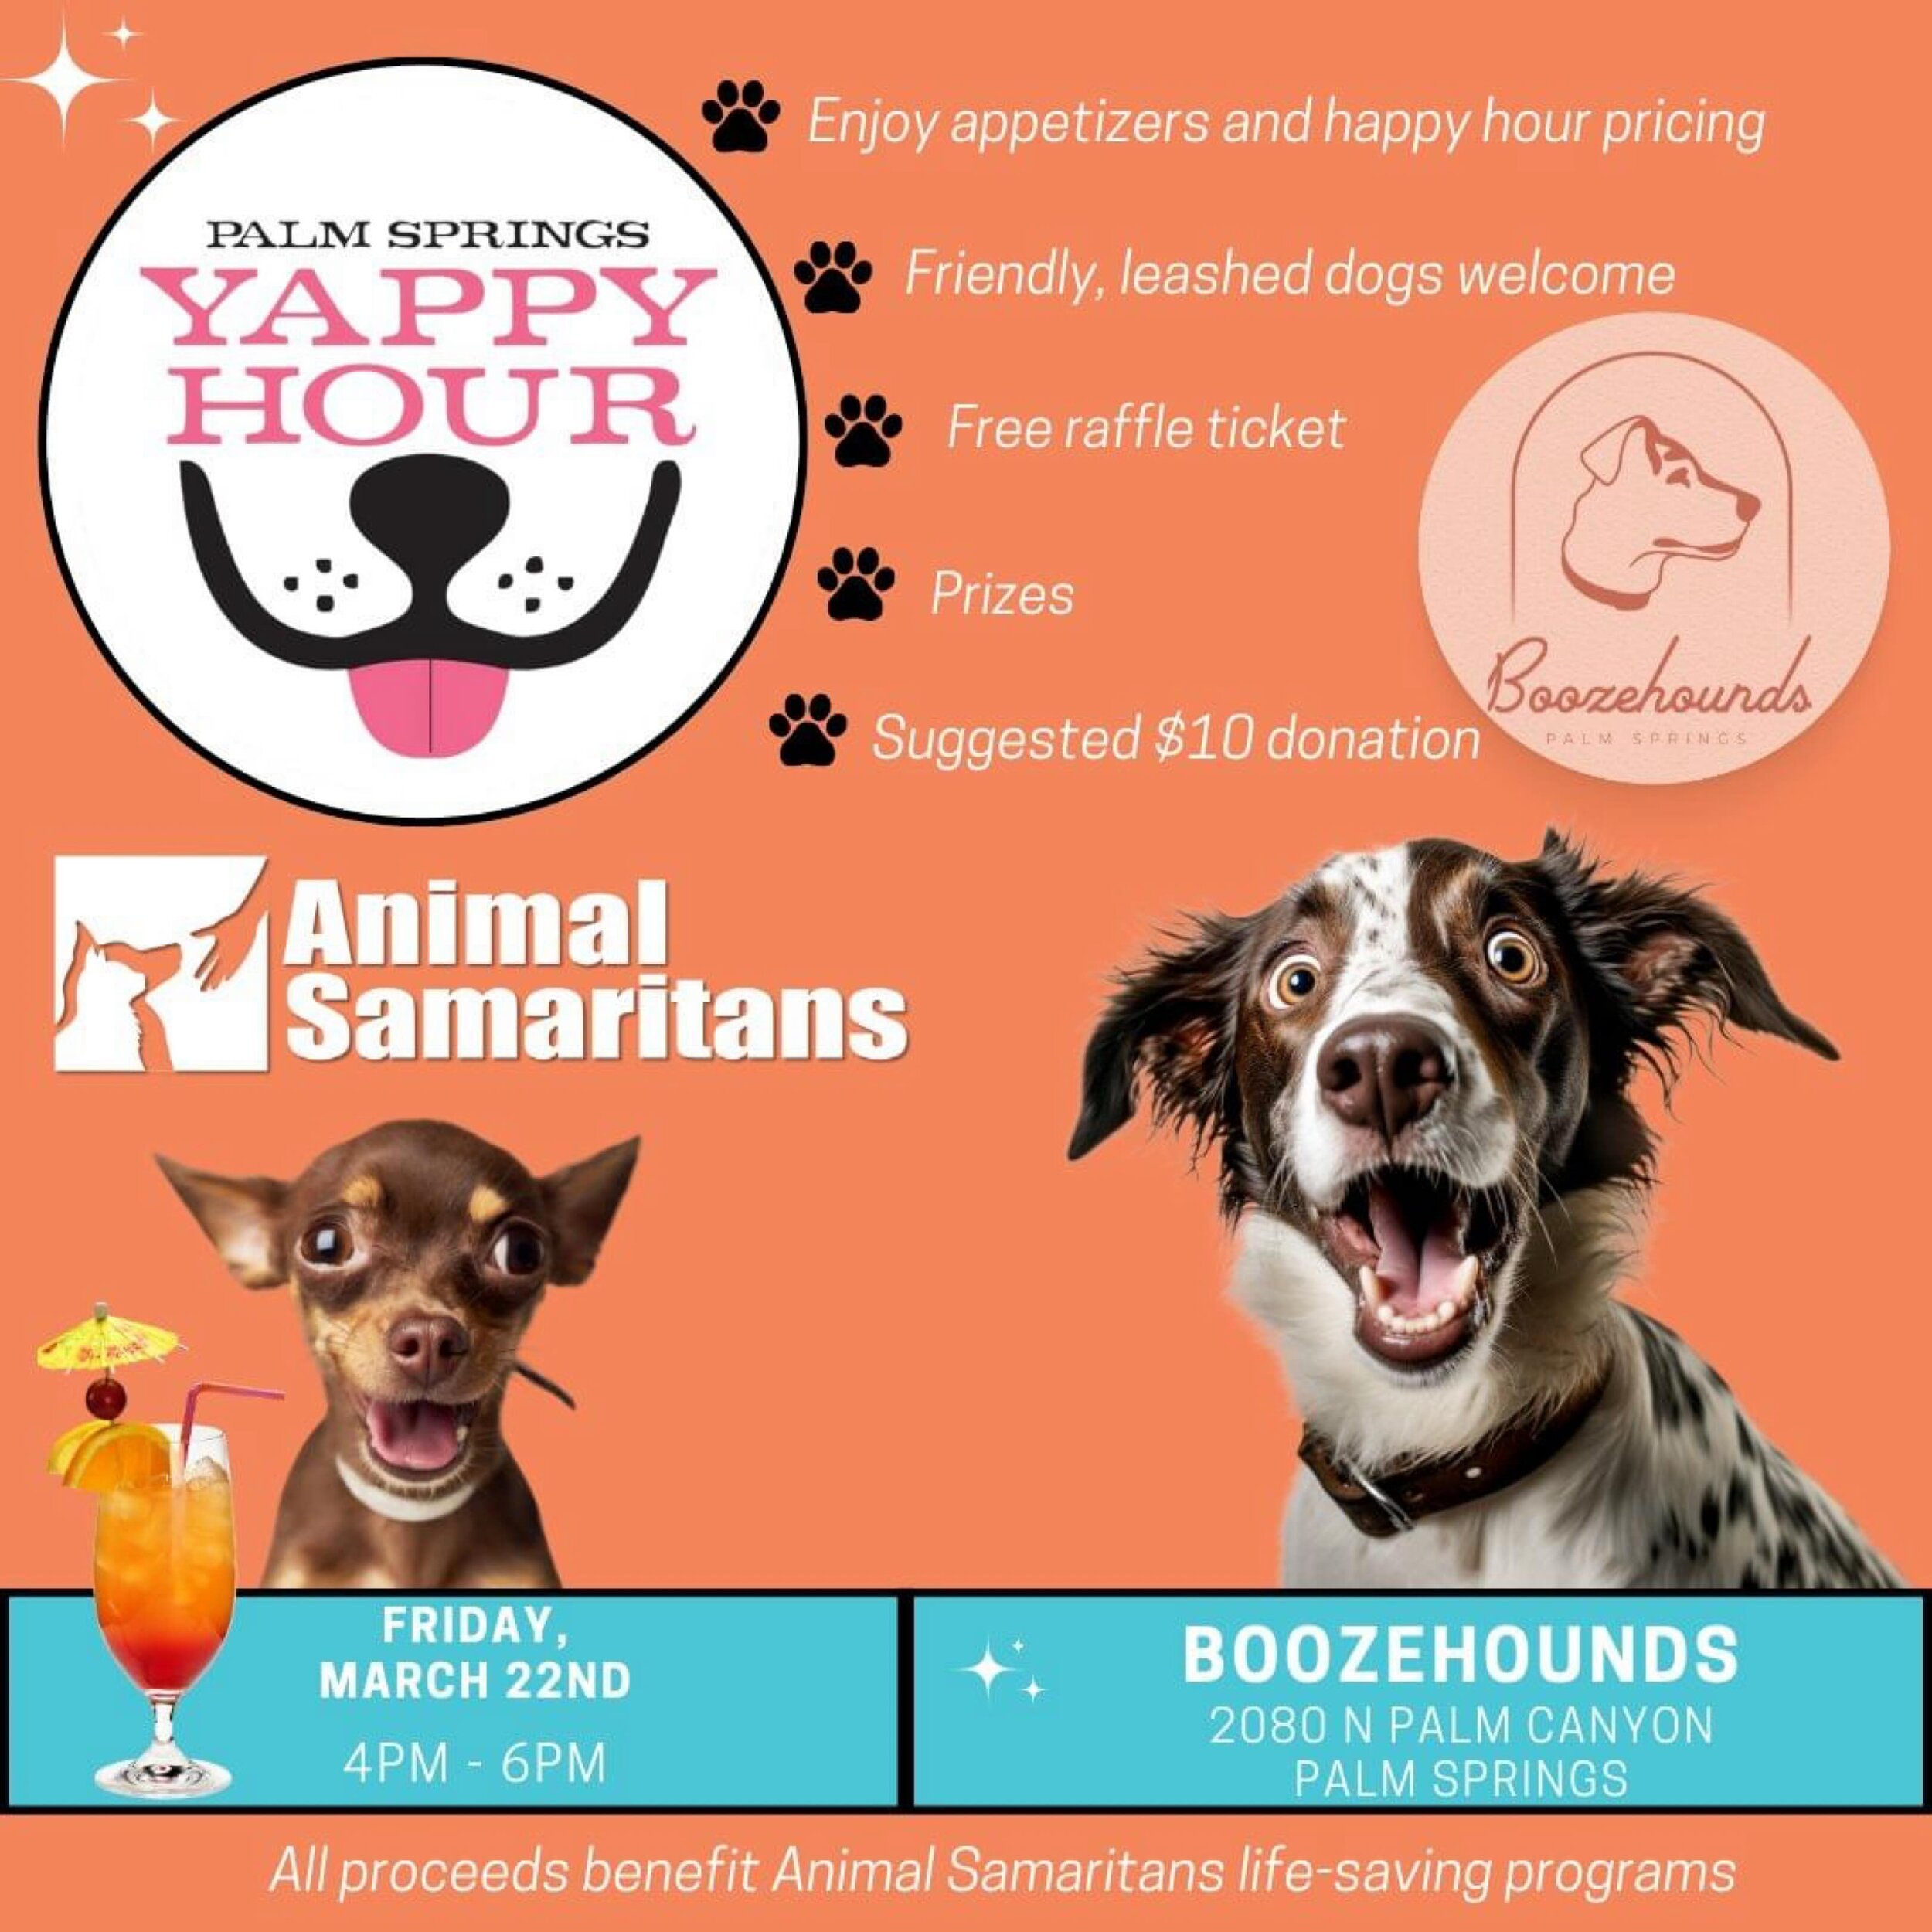 Join me Friday with  @animalsamaritans @boozehoundsps with a chance to win a massage for your dog 🐶❤️
・・・
𝐏𝐚𝐥𝐦 𝐒𝐩𝐫𝐢𝐧𝐠𝐬 𝐘𝐚𝐩𝐩𝐲 𝐇𝐨𝐮𝐫 𝐈𝐒 𝐁𝐀𝐂𝐊!

Bring your friendly, leashed canine companion and join Animal Samaritans for Yappy 